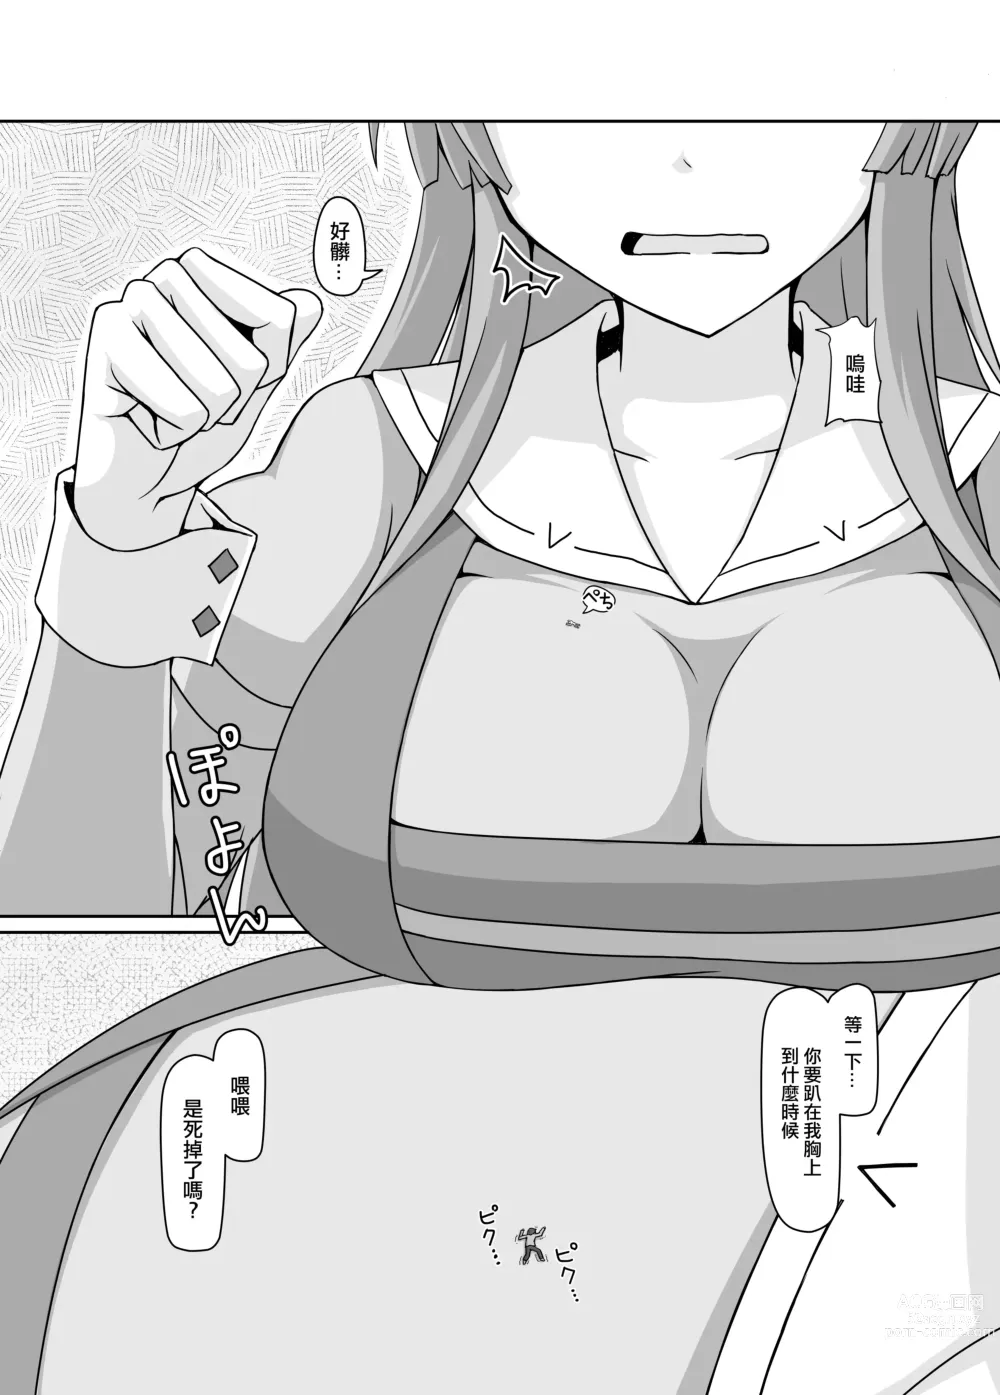 Page 9 of doujinshi 小小人類就由我來衰退